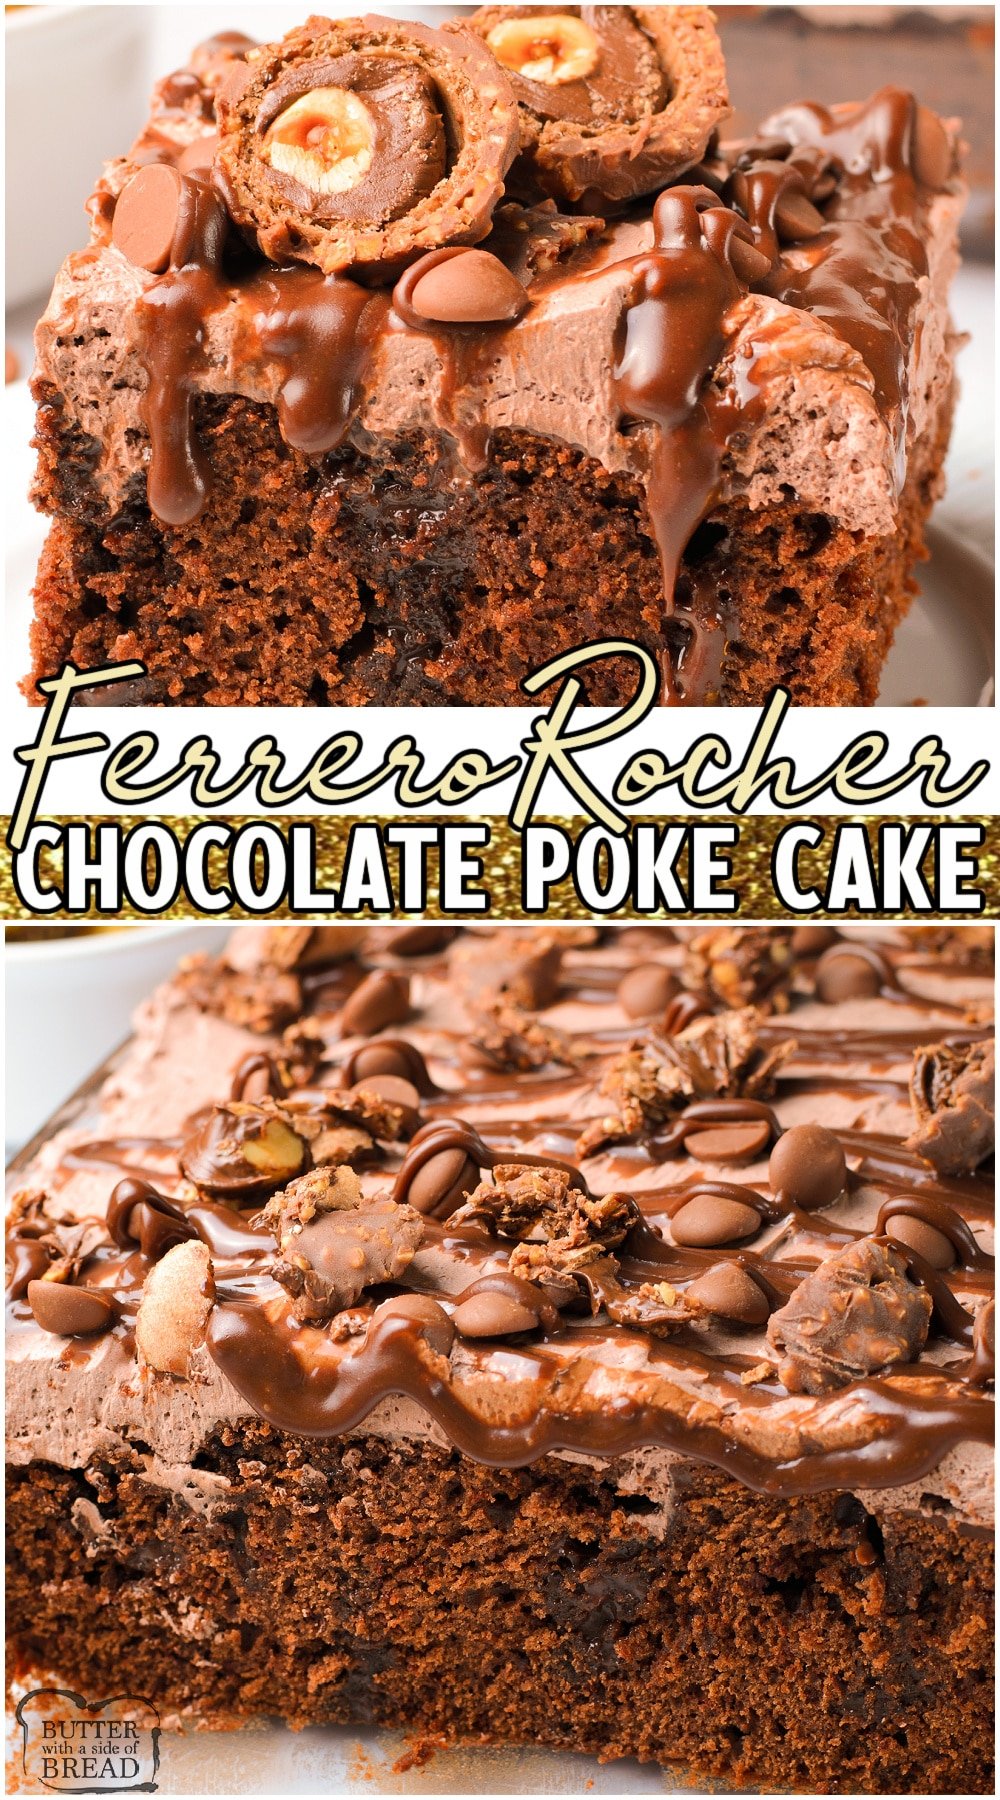 Ferrero Rocher poke cake made with chocolate, nutella & plenty of Ferrero Rochers of course! A rich chocolate hazelnut poke cake made with Ferrero Rocher candy as the featured ingredient in this fantastic dessert. #FerreroRocher #chocolate #hazelnut #nutella #cake #pokecake #easyrecipe from BUTTER WITH A SIDE OF BREAD